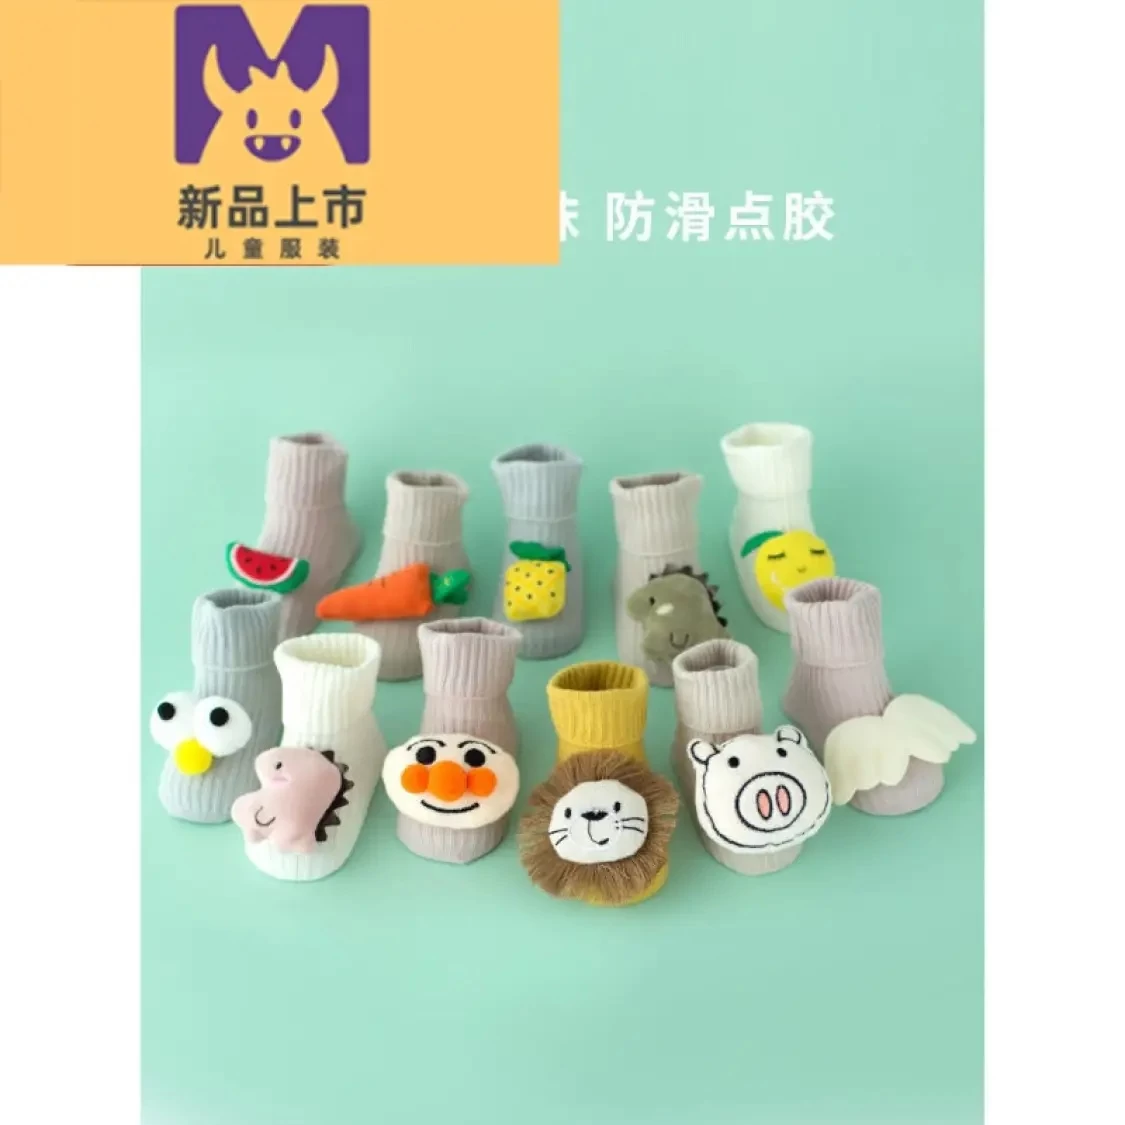 Children's socks suitable for babies and infants, a supplier specializing in the production of this kind of socks